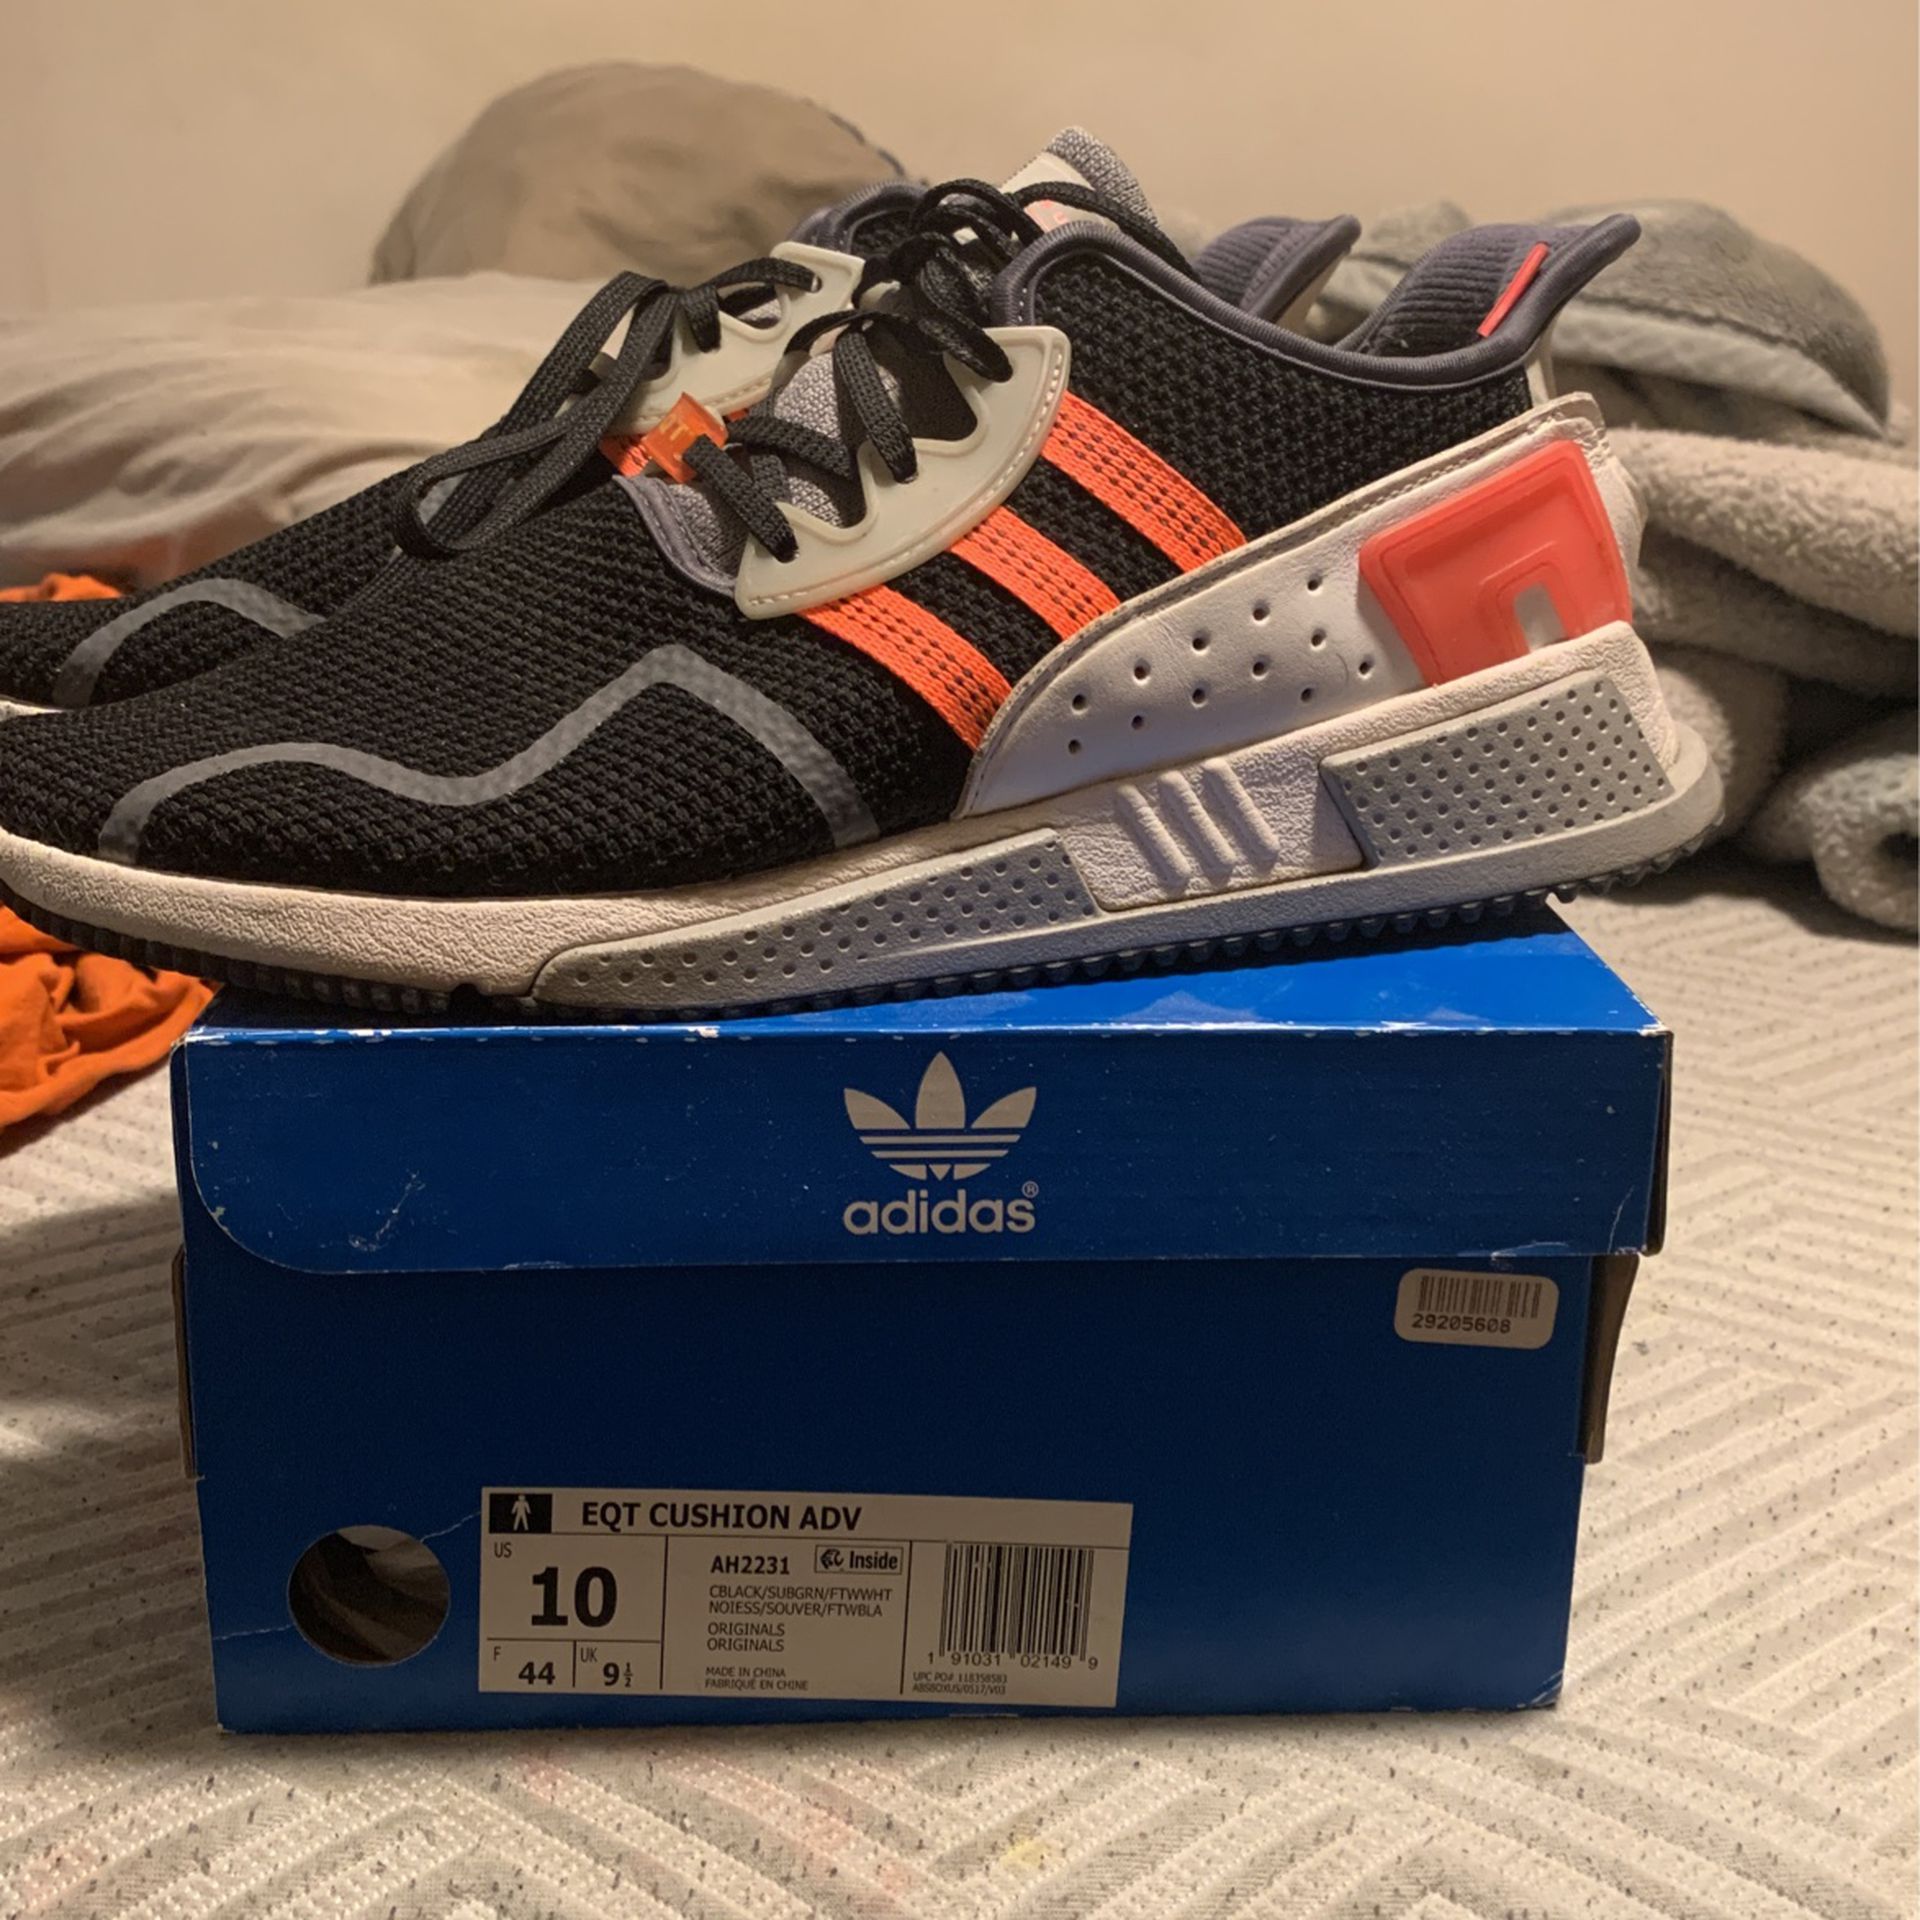 $75 Size 10 Adidas EQT Cushion Adv Great Condition With Box